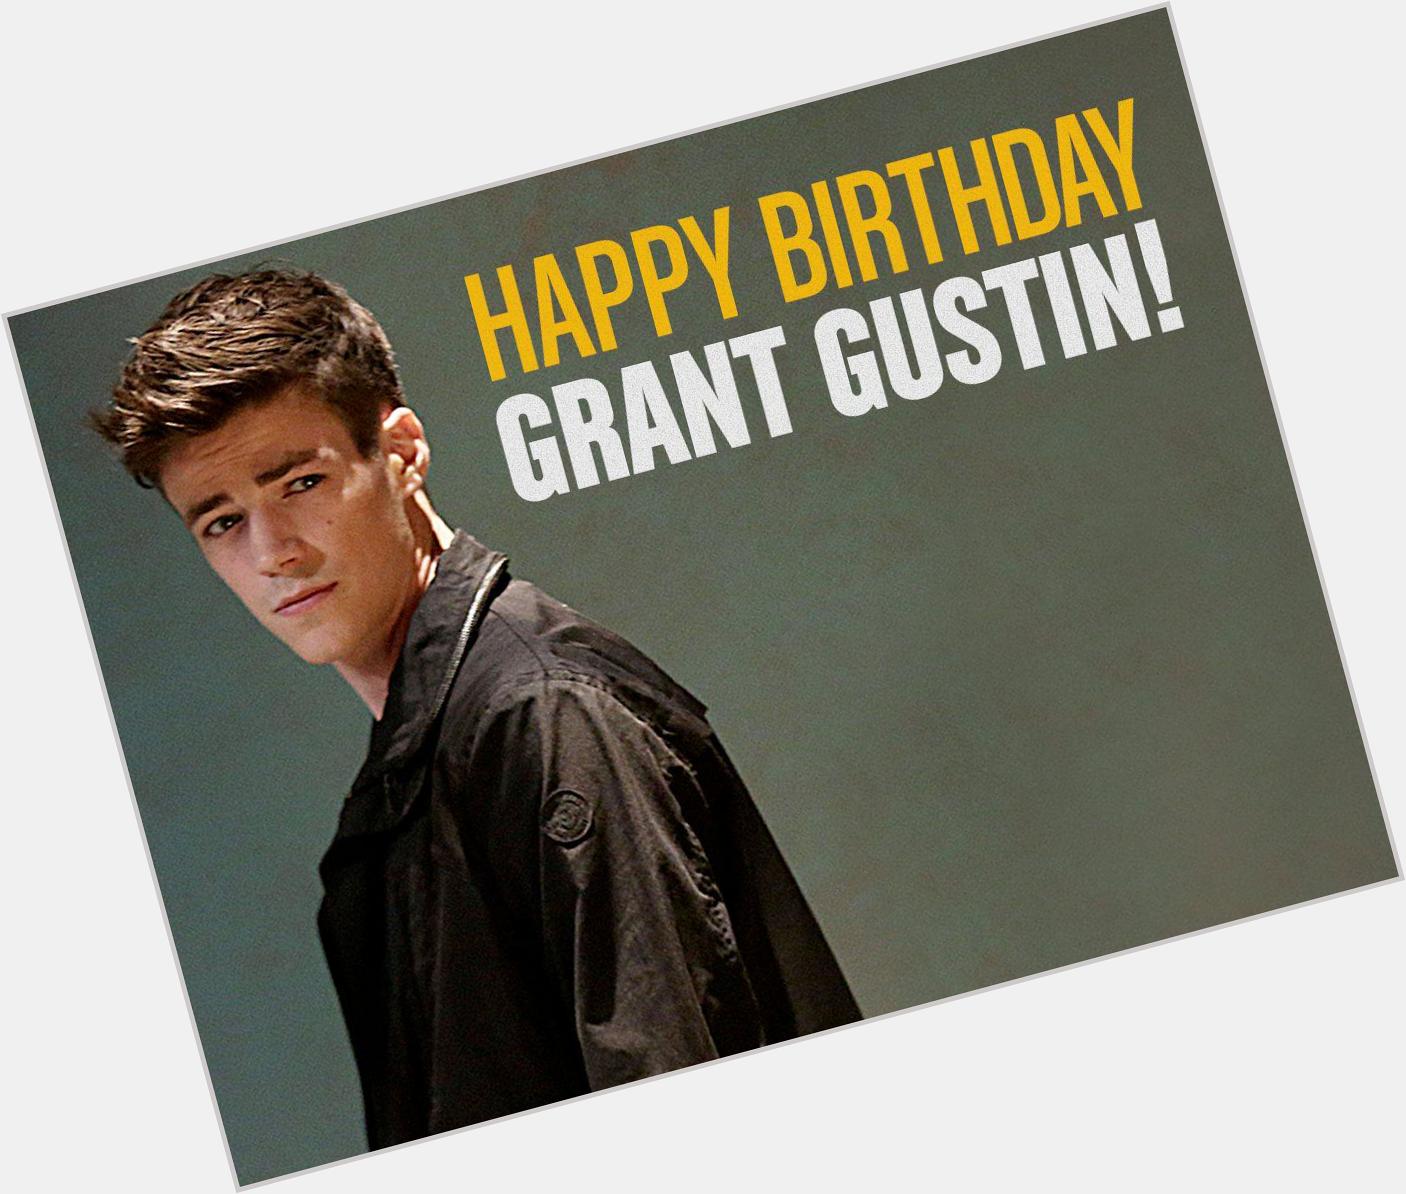 Muitos parabéns para Grant Gustin, aka Happy birthday Best wishes from Portugal!  